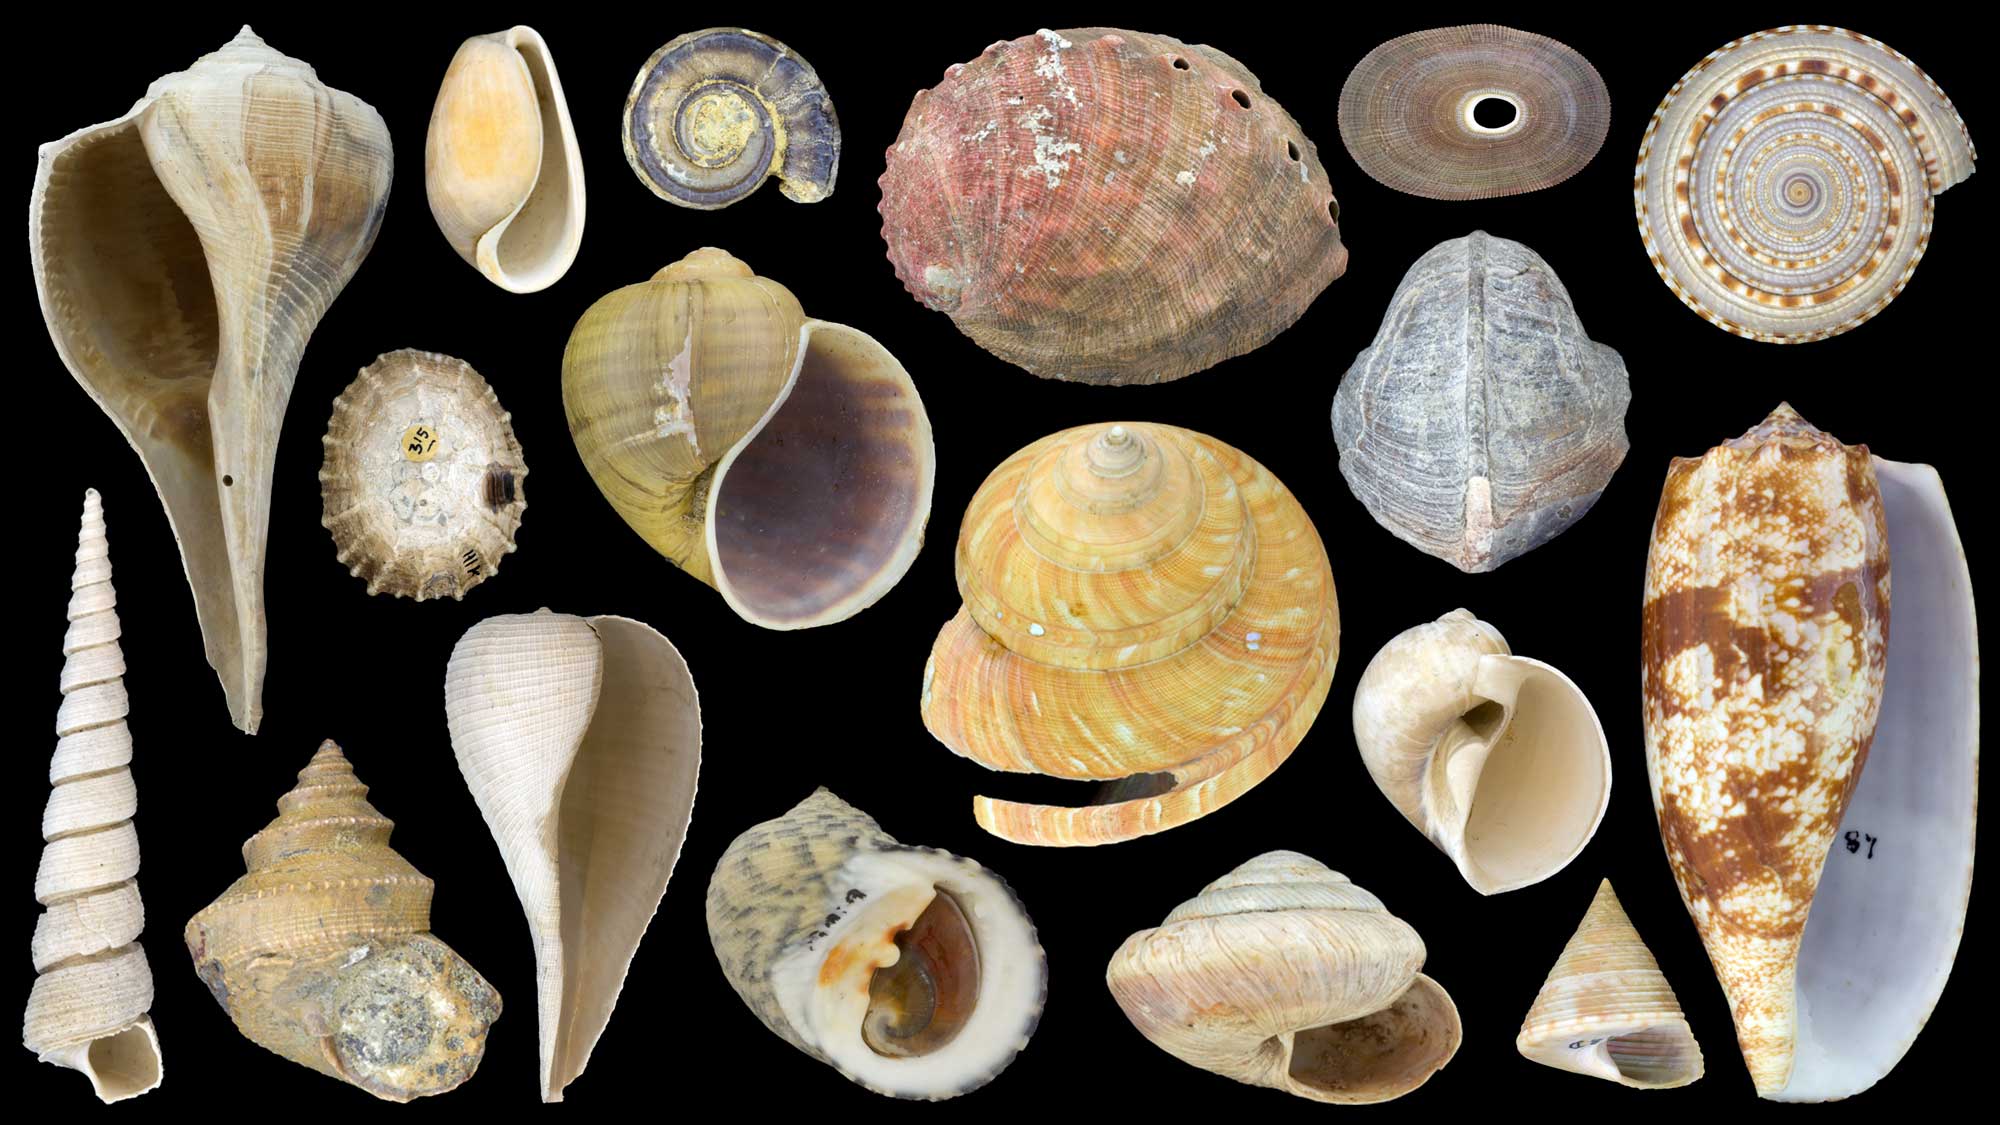 Image showing a variety of modern and fossil gastropod shells.